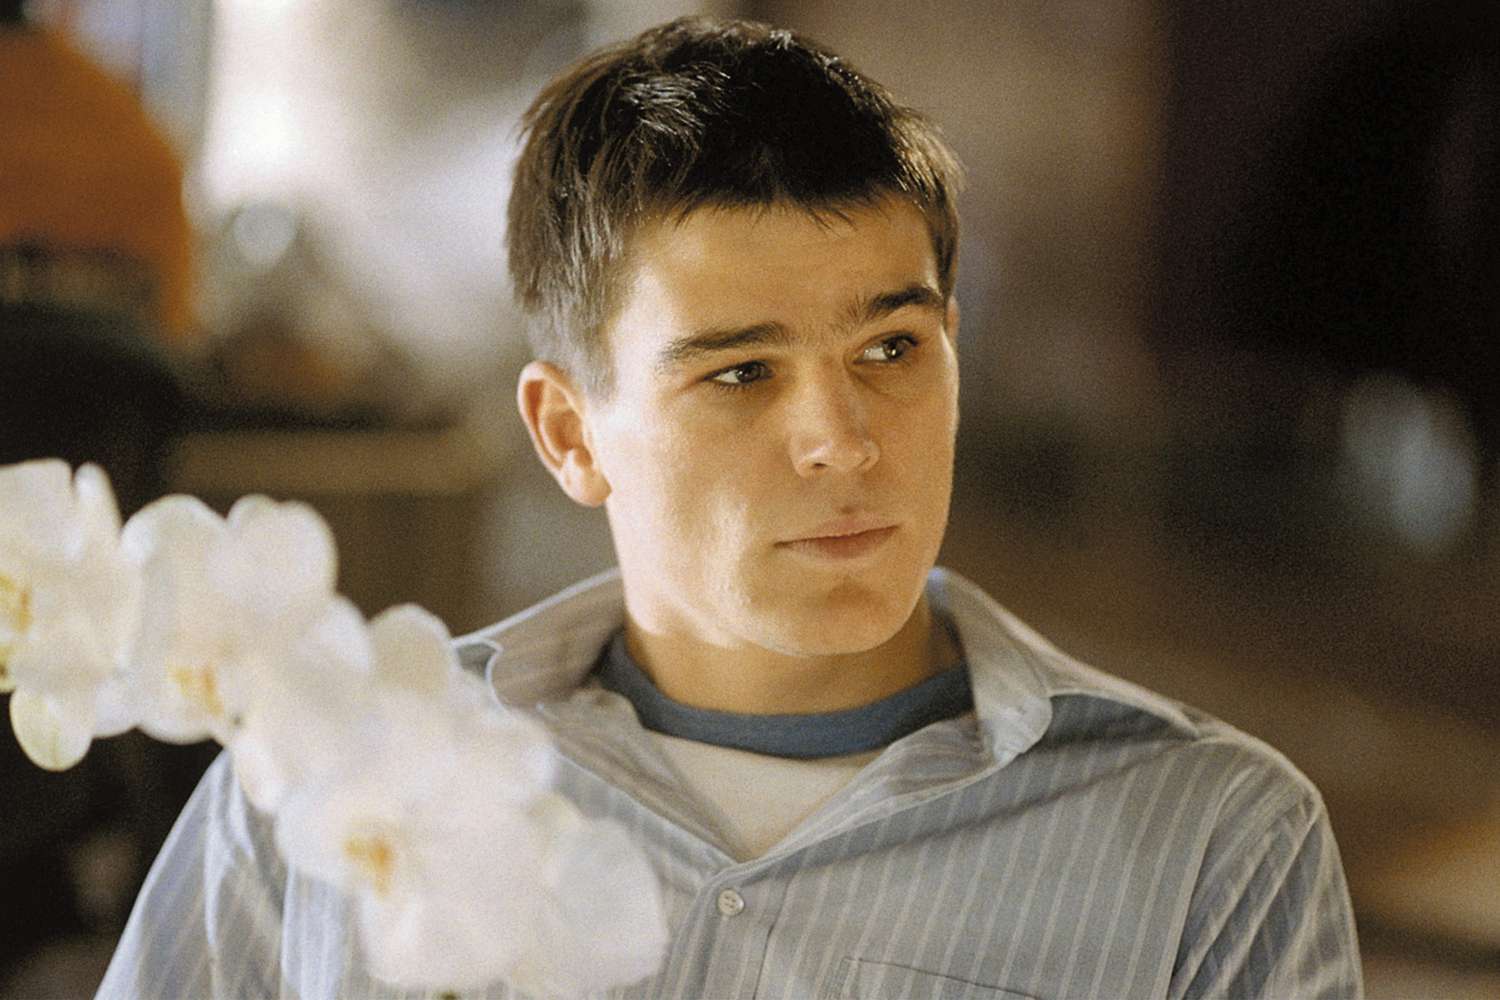 Josh Hartnett says ‘40 Days and 40 Nights’ was ‘a different time’: ‘It’s funny to a 21-year-old’